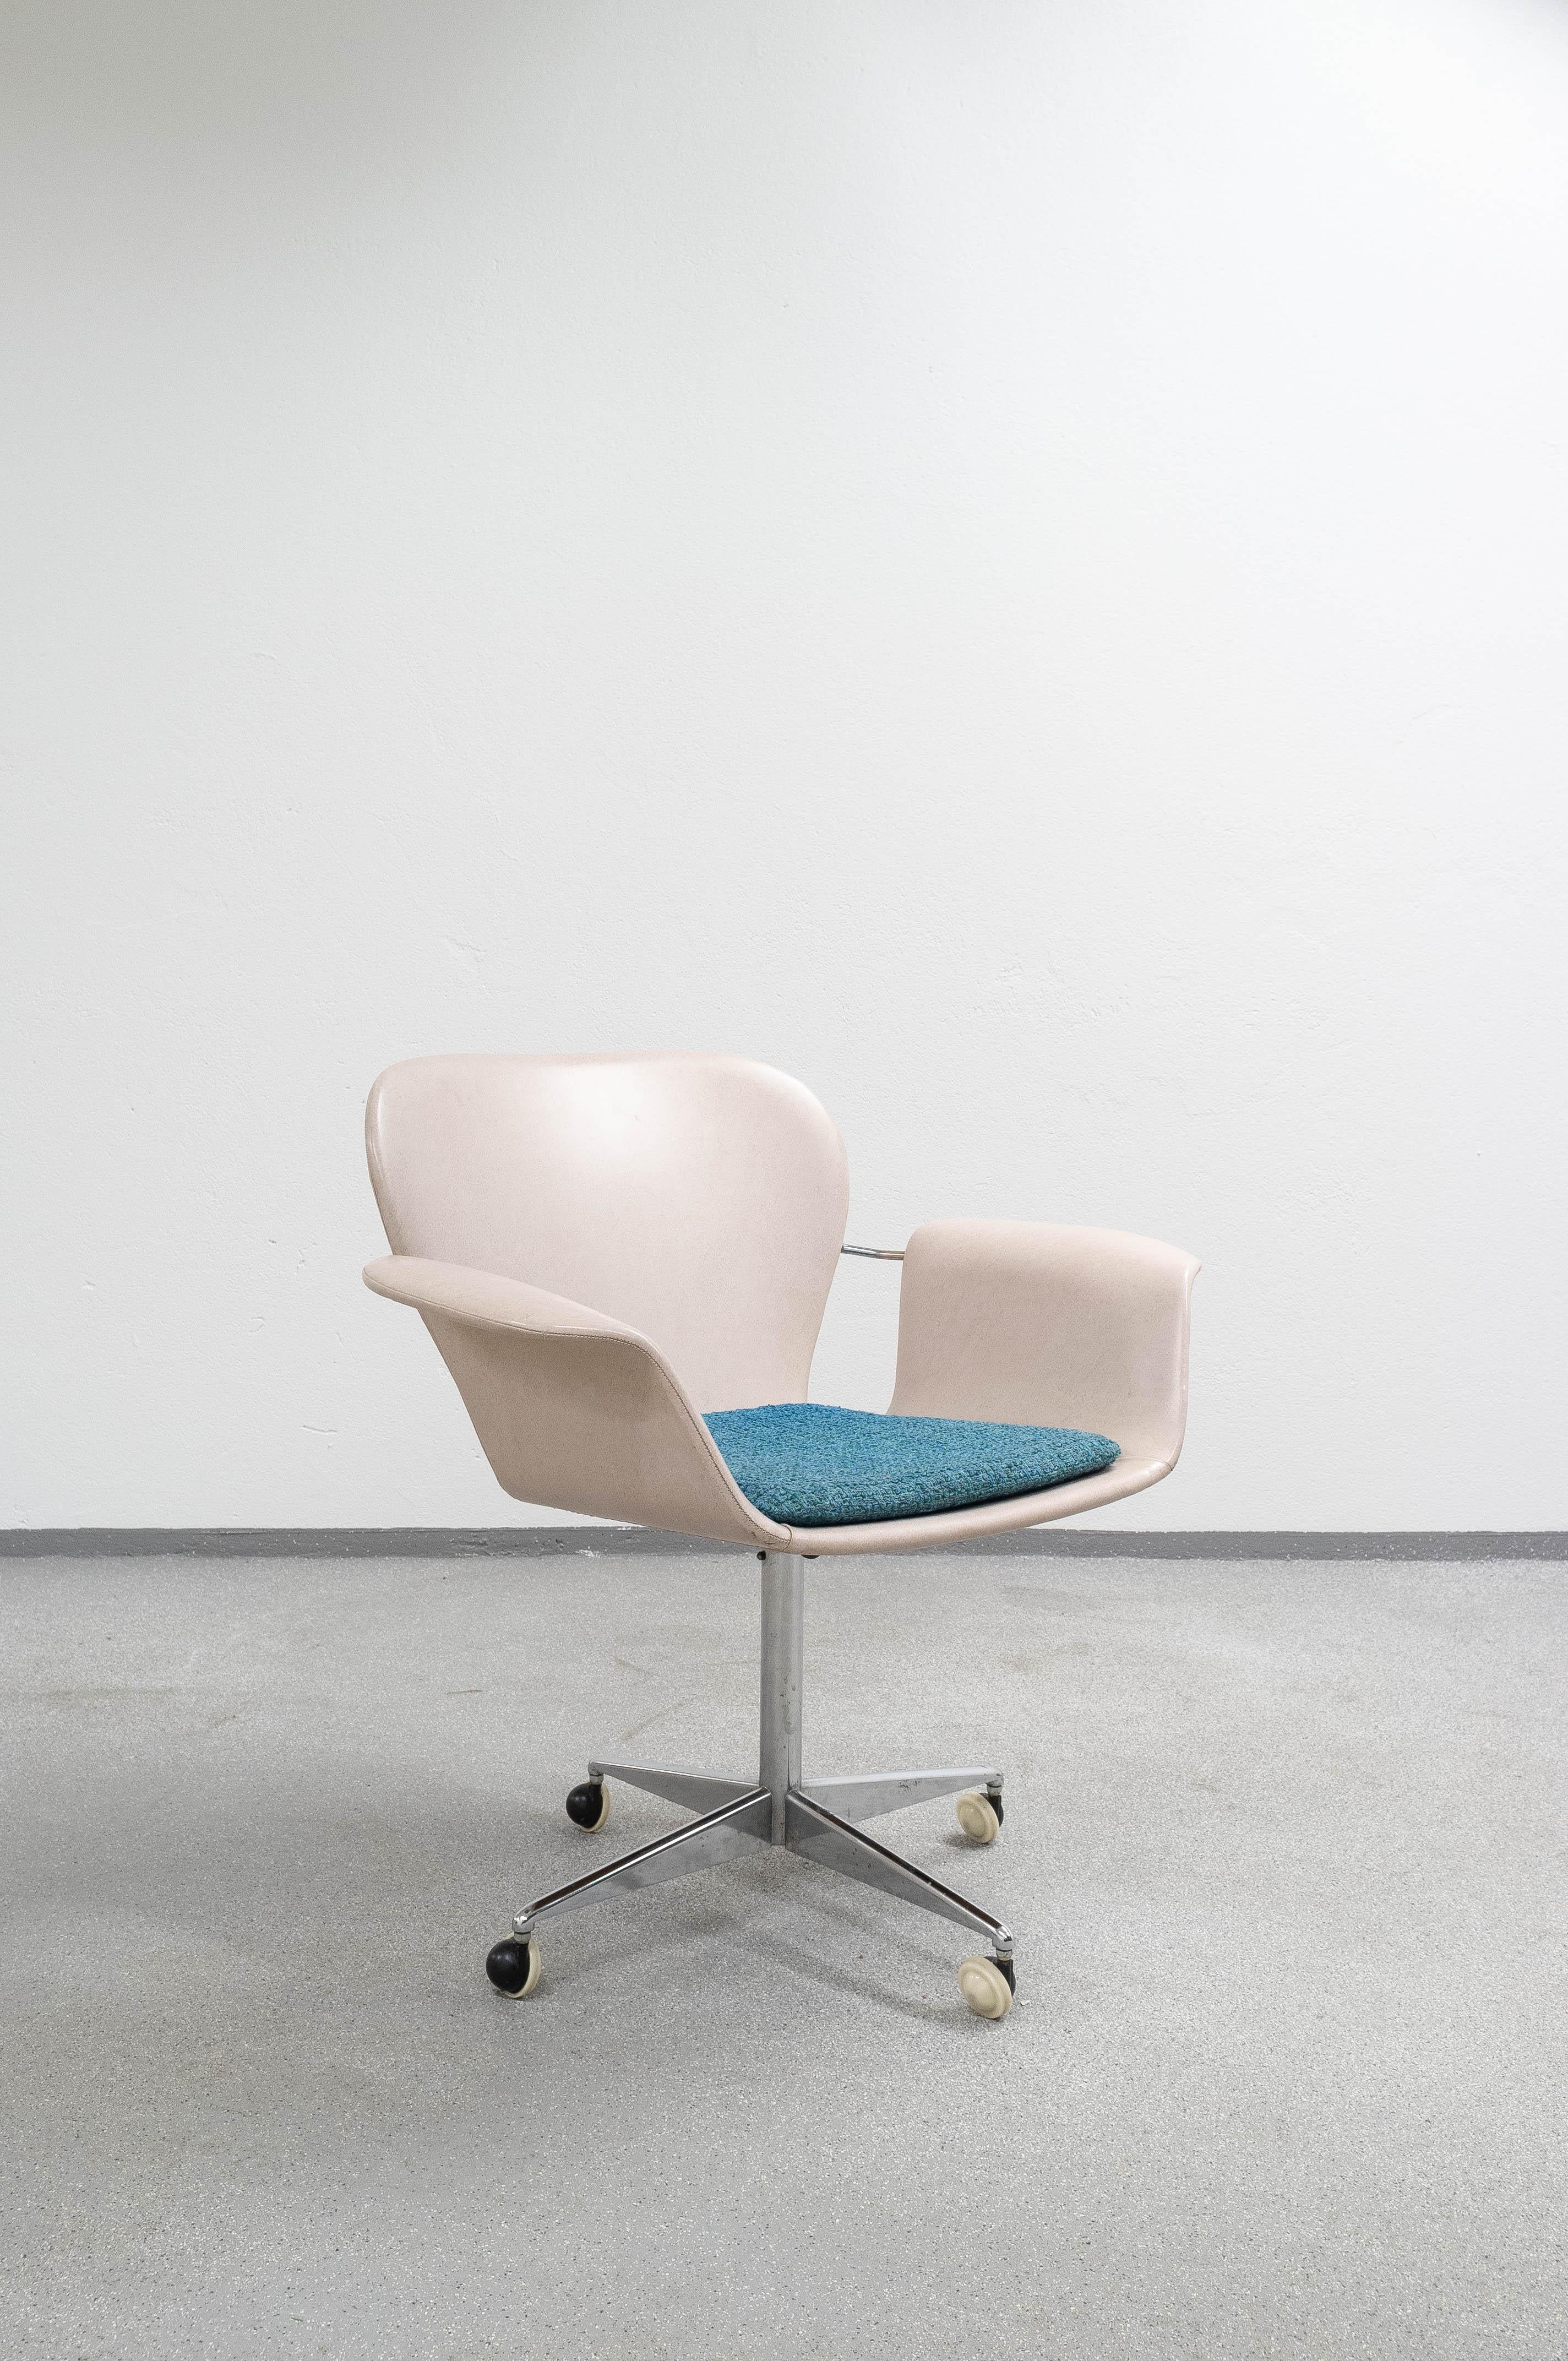 Mid-Century Modern swivel office chair by Kjell Hjell & Bjarne Stave, manufactured by Møre Lenestolfabrikk. Original wool cushion.

A variation of this chair is part of The National Museum, Design collection, Norway.





